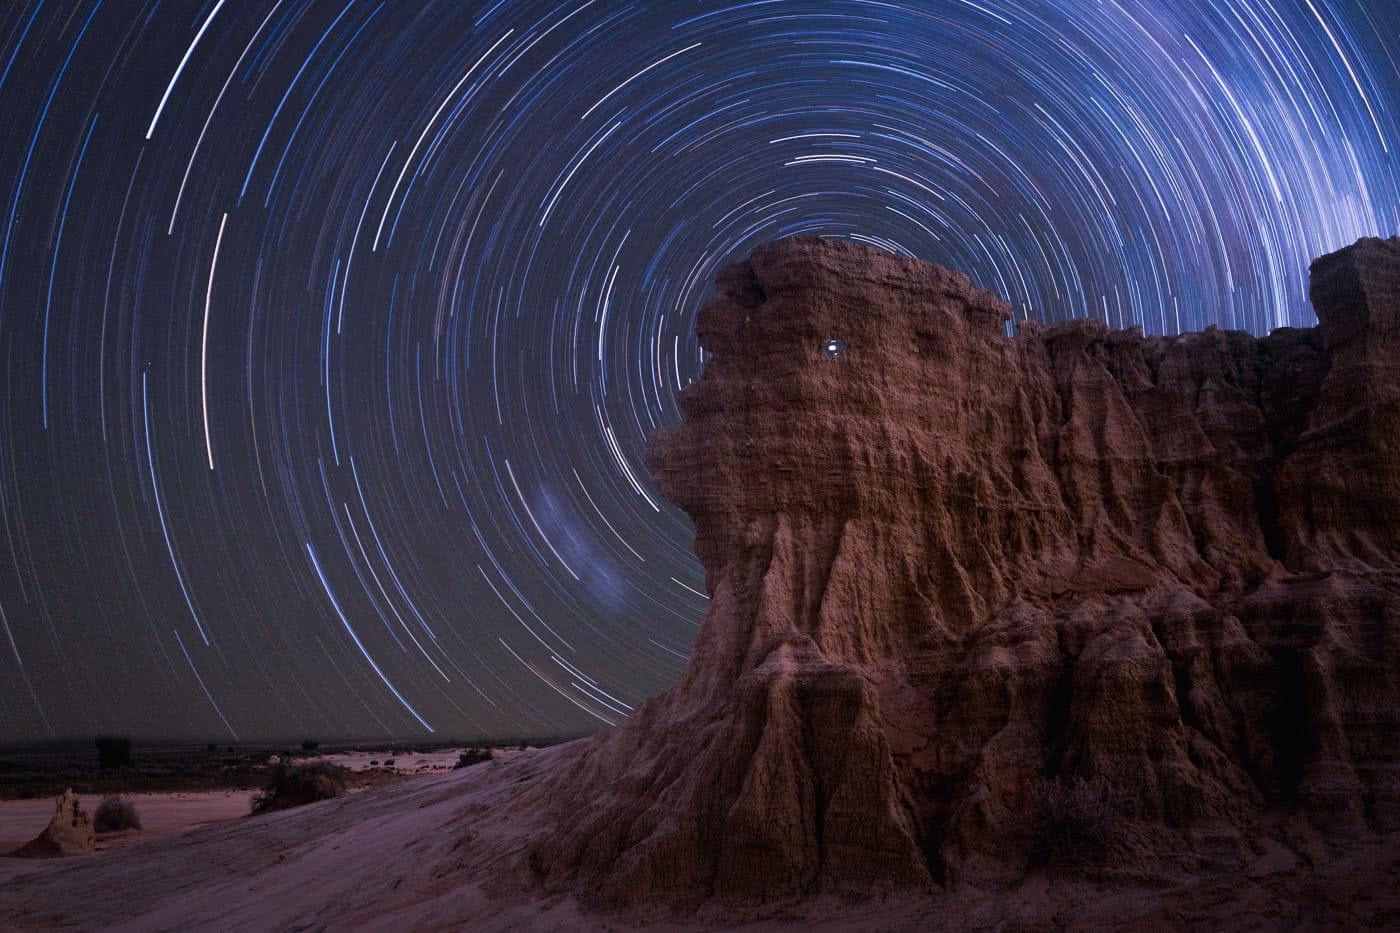 How To Take Photos in Mungo National Park, Conor Moore, Walls of China, stars, astrophotography, night, sand dunes, cliffs